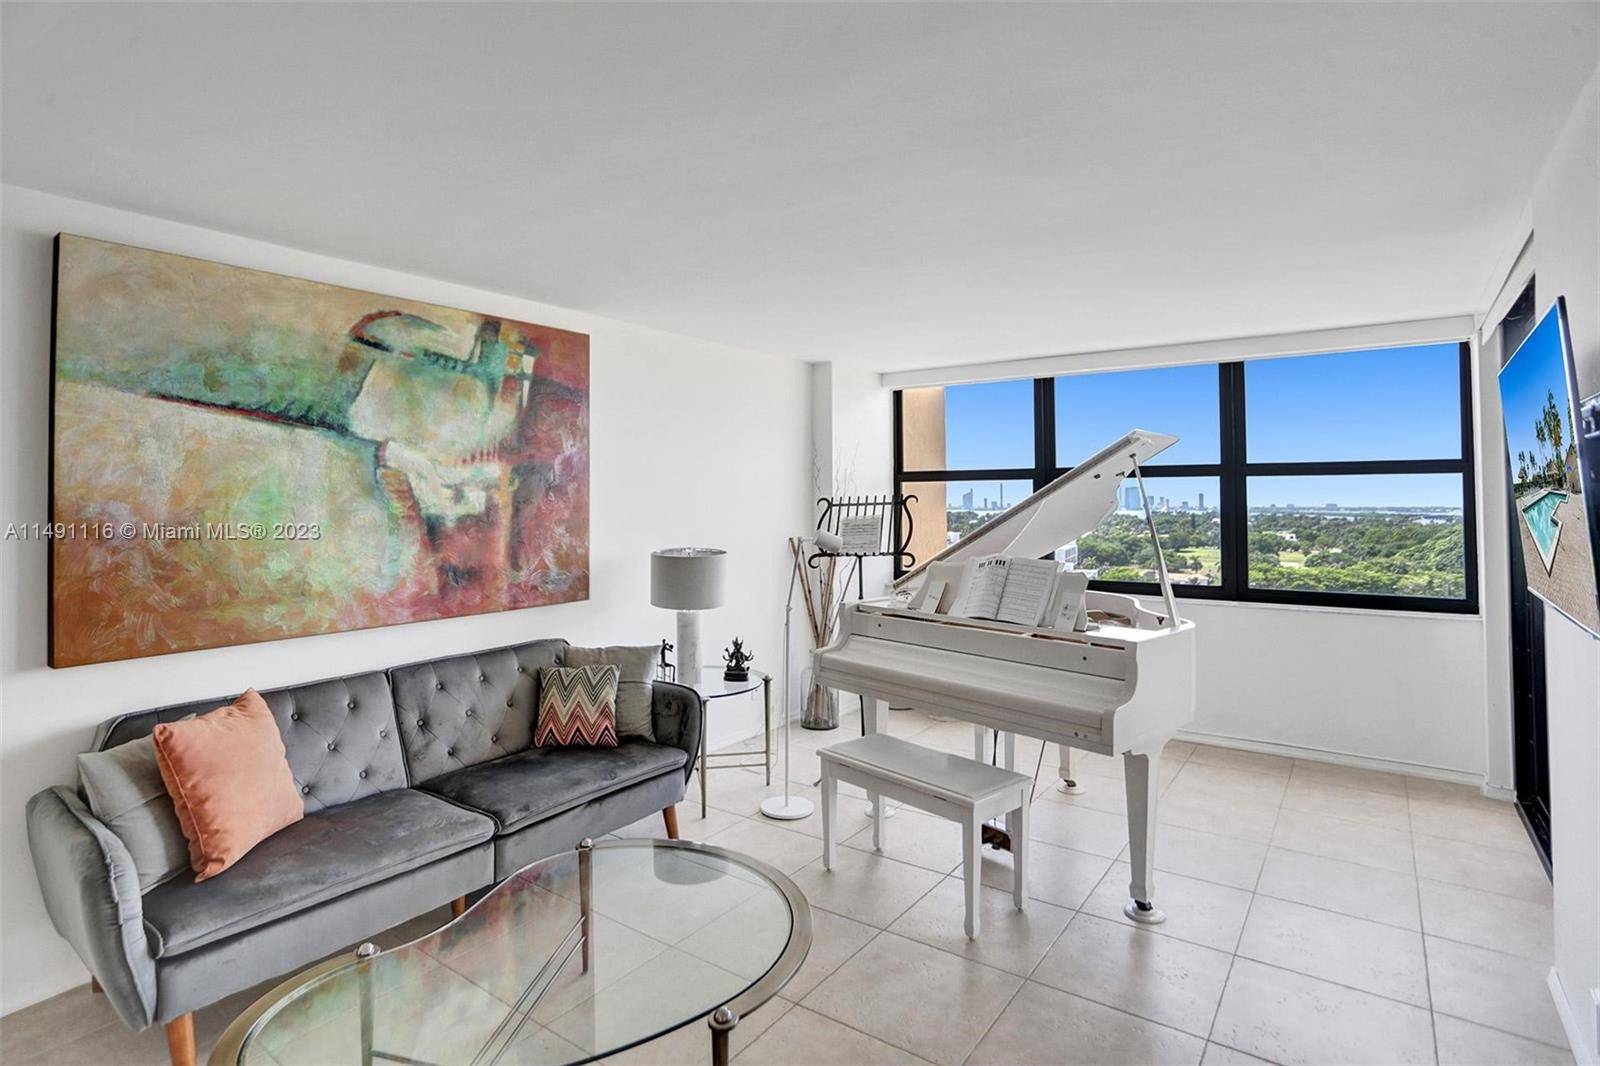 Experience stunning inter coastal and Miami skyline views from this oceanfront building with a heated pool.